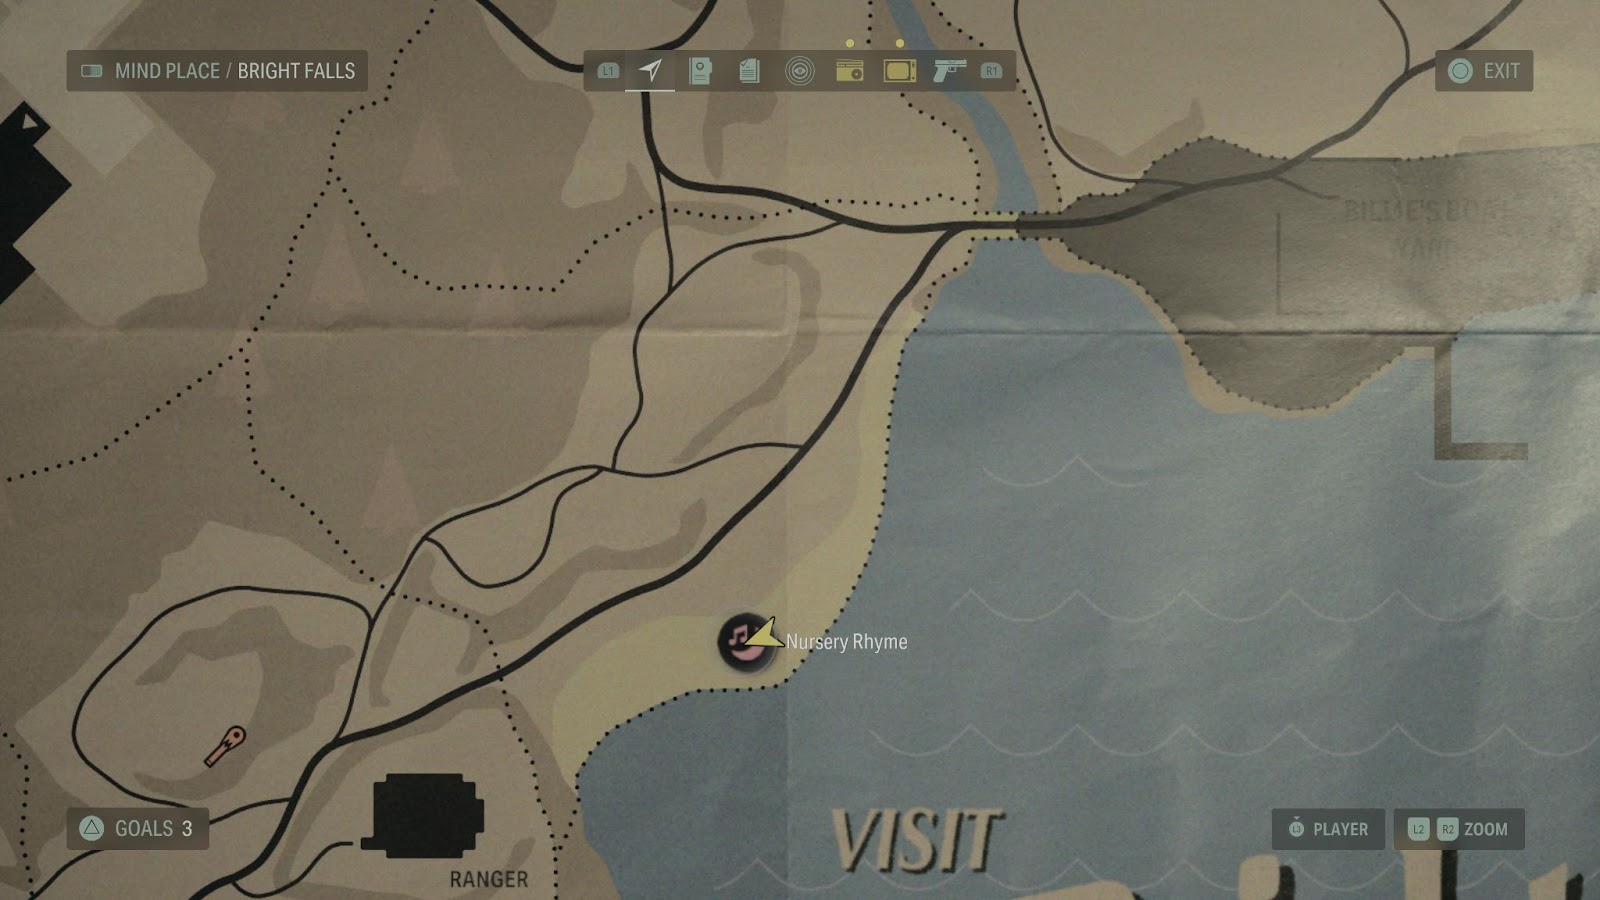 An in game screenshot of the Bright Falls map from Alan Wake 2